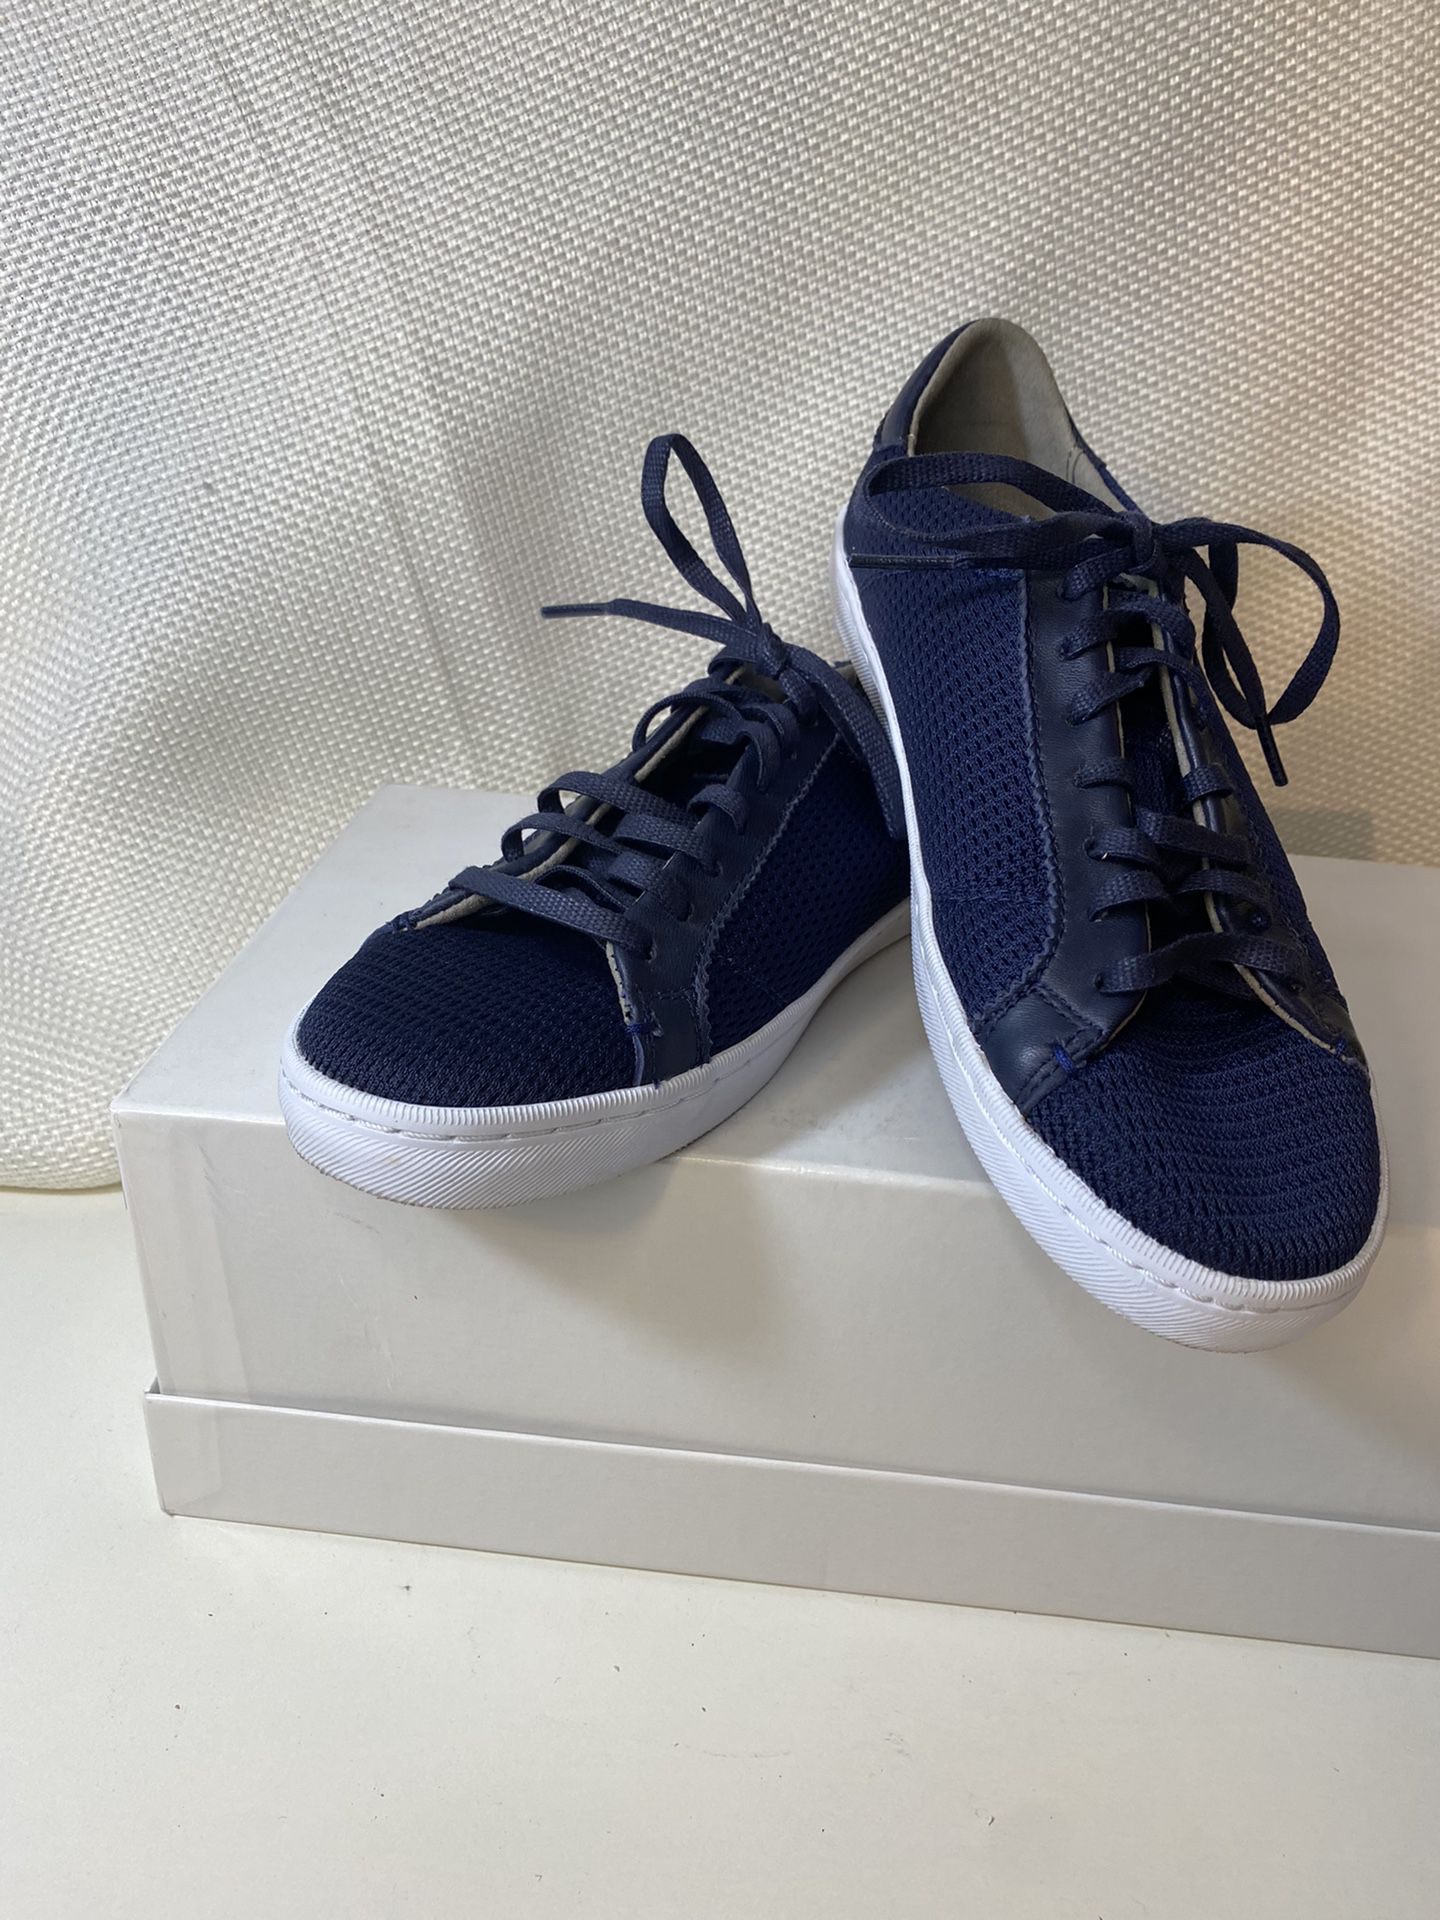 Cole Haan leather mesh navy blue tennis shoes size 5.5 for Sale in ...